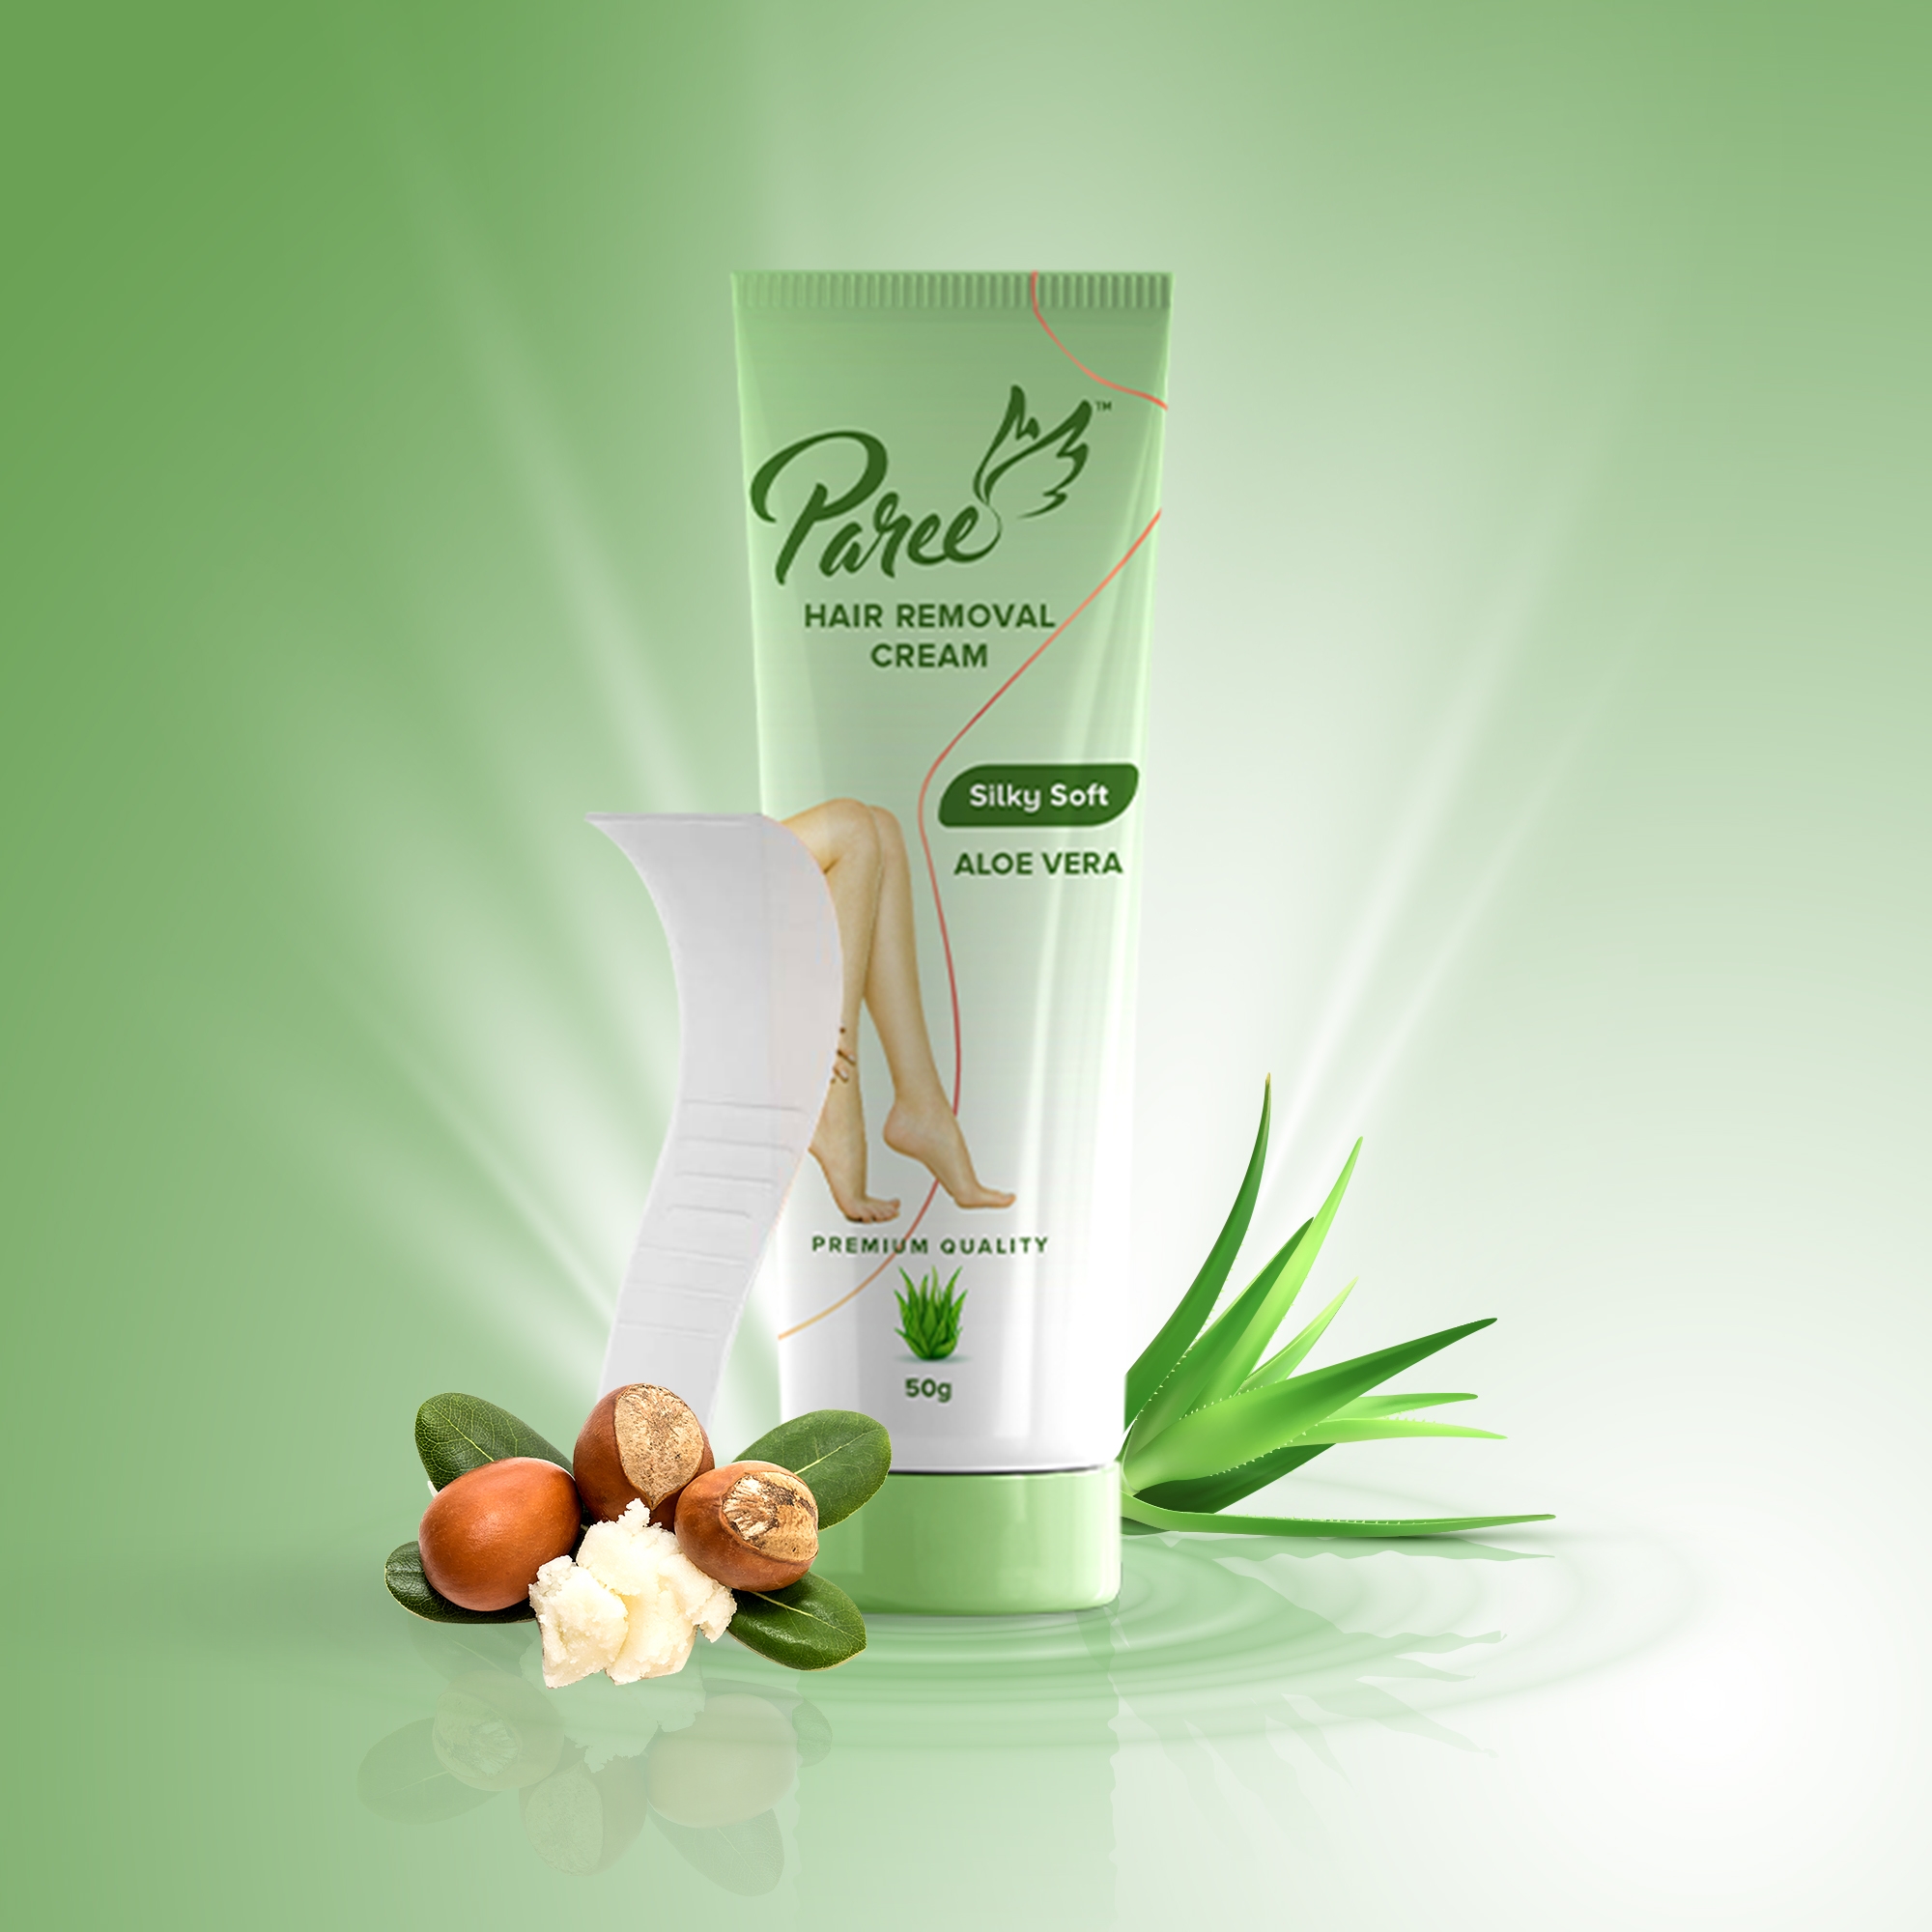 https://cdn.fynd.com/v2/falling-surf-7c8bb8/fyprod/wrkr/products/pictures/item/free/original/qW1uaHx17-Paree-Hair-Removal-Cream-Silky-Soft-With-Aloe-Vera-(50g)-or-For-Sensitive-Skin.jpeg